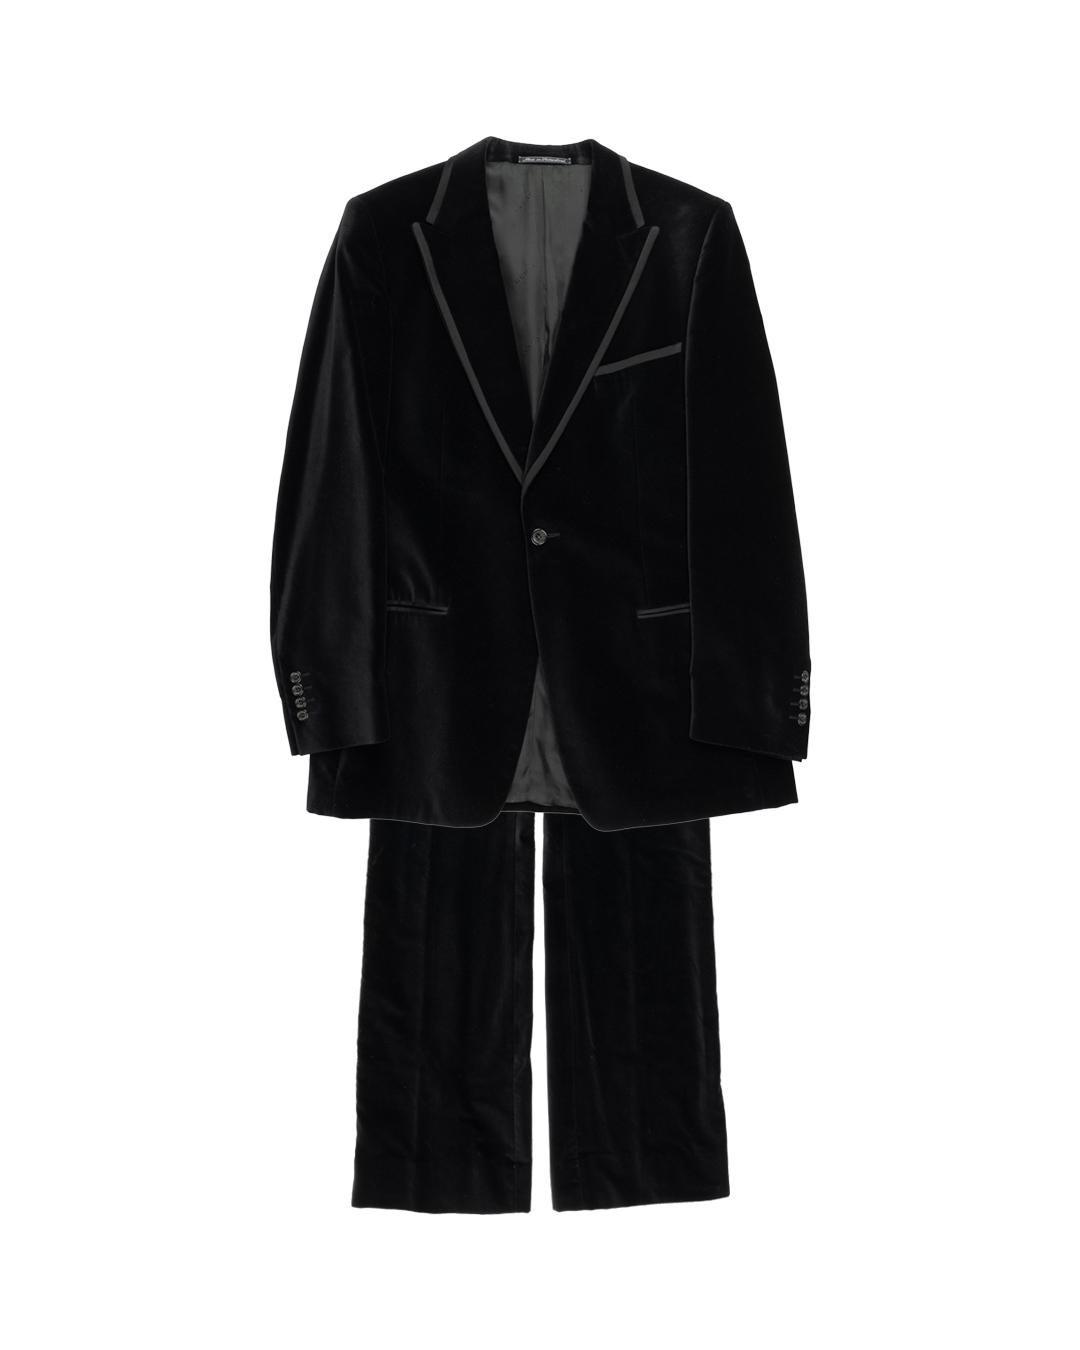 Gucci by Tom Ford AW1996 Velvet Smoking Tuxedo For Sale 3